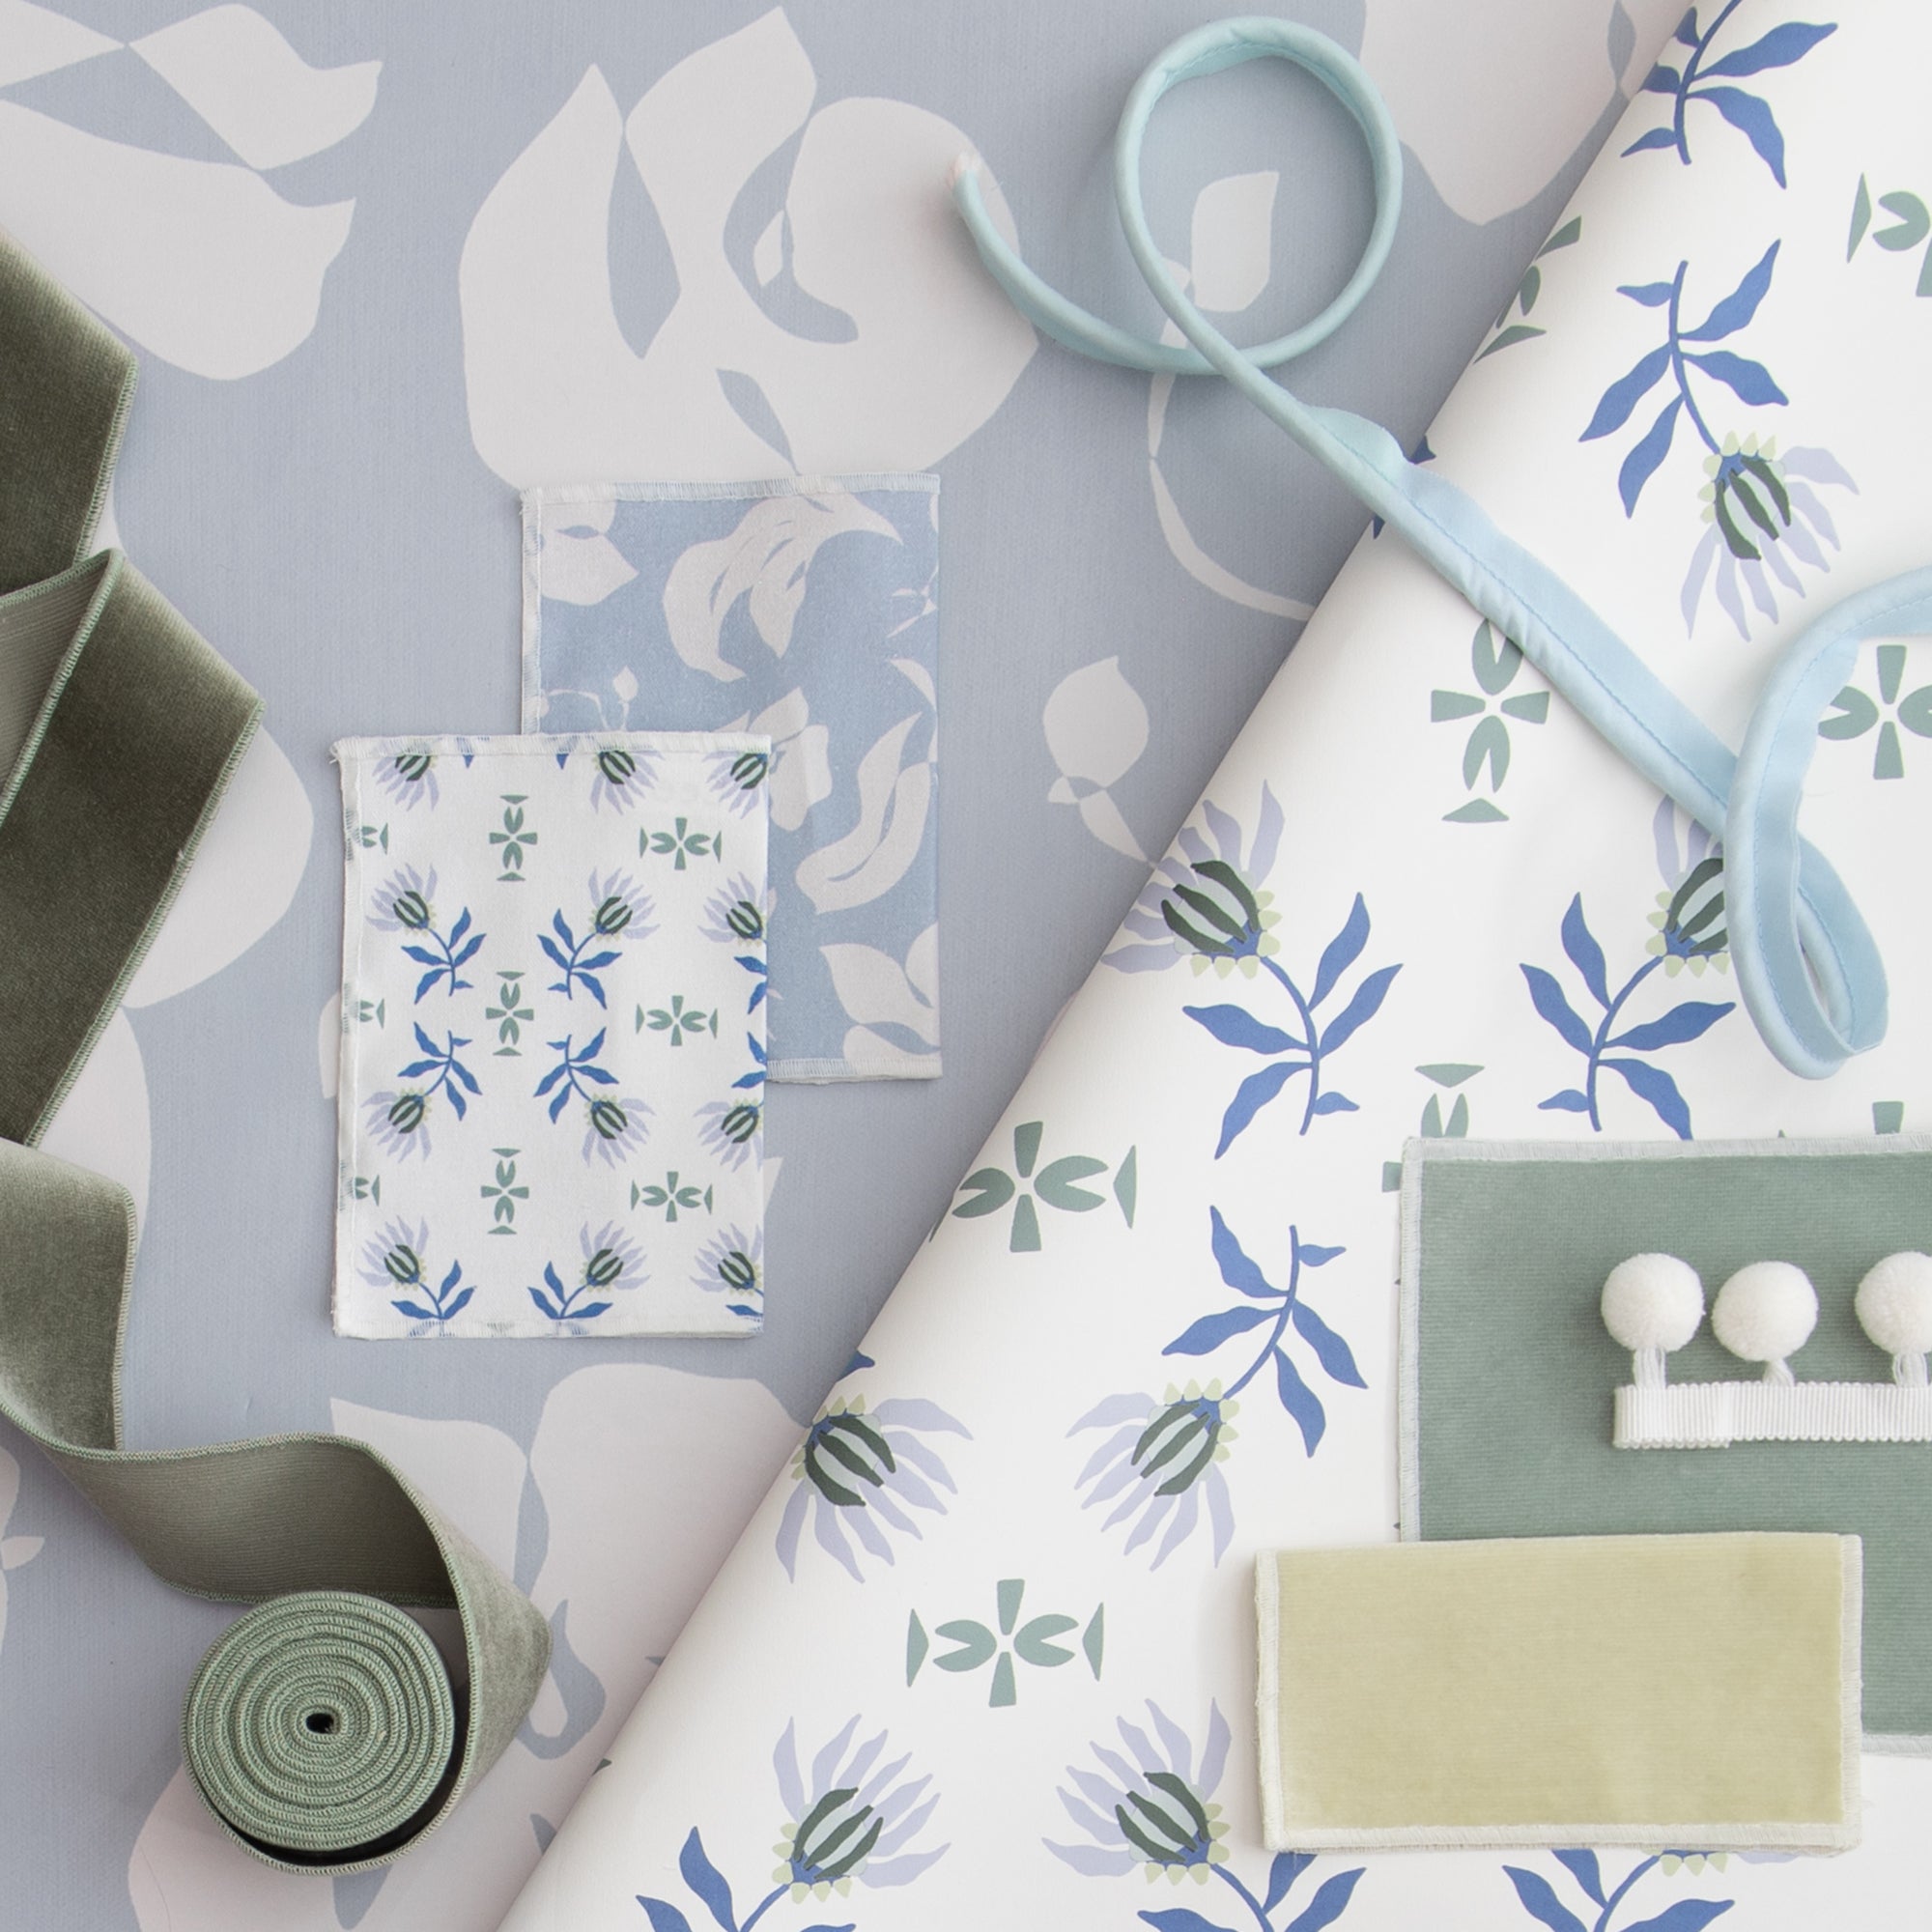 interior design moodboard with blue and green floral wallpaper and fabric swatches, blue piping, white pom poms, and fern green velvet band trim